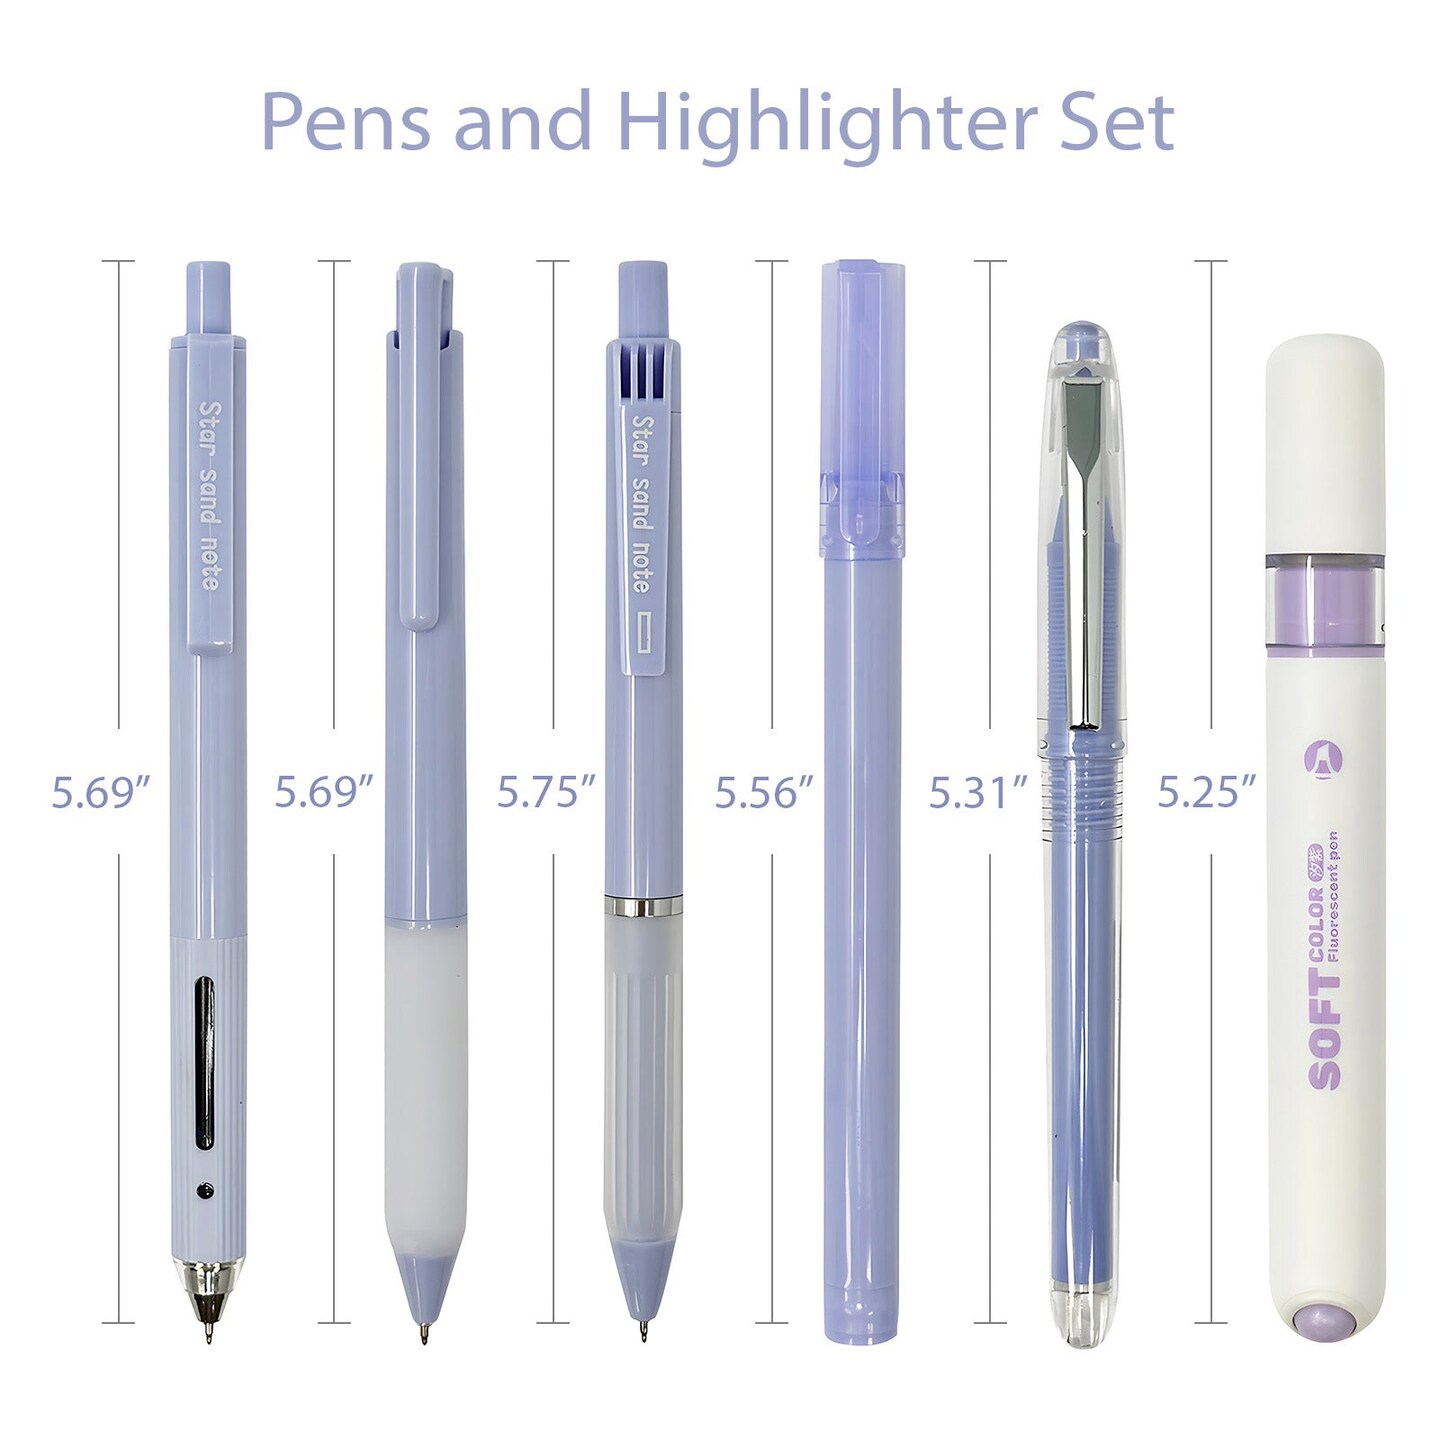 Wrapables 5 Gel Pens + 1 Highlighter Writing Set, 0.5mm Black Ink Pens, for Bible Studies, Journaling, Home and Office, Purple